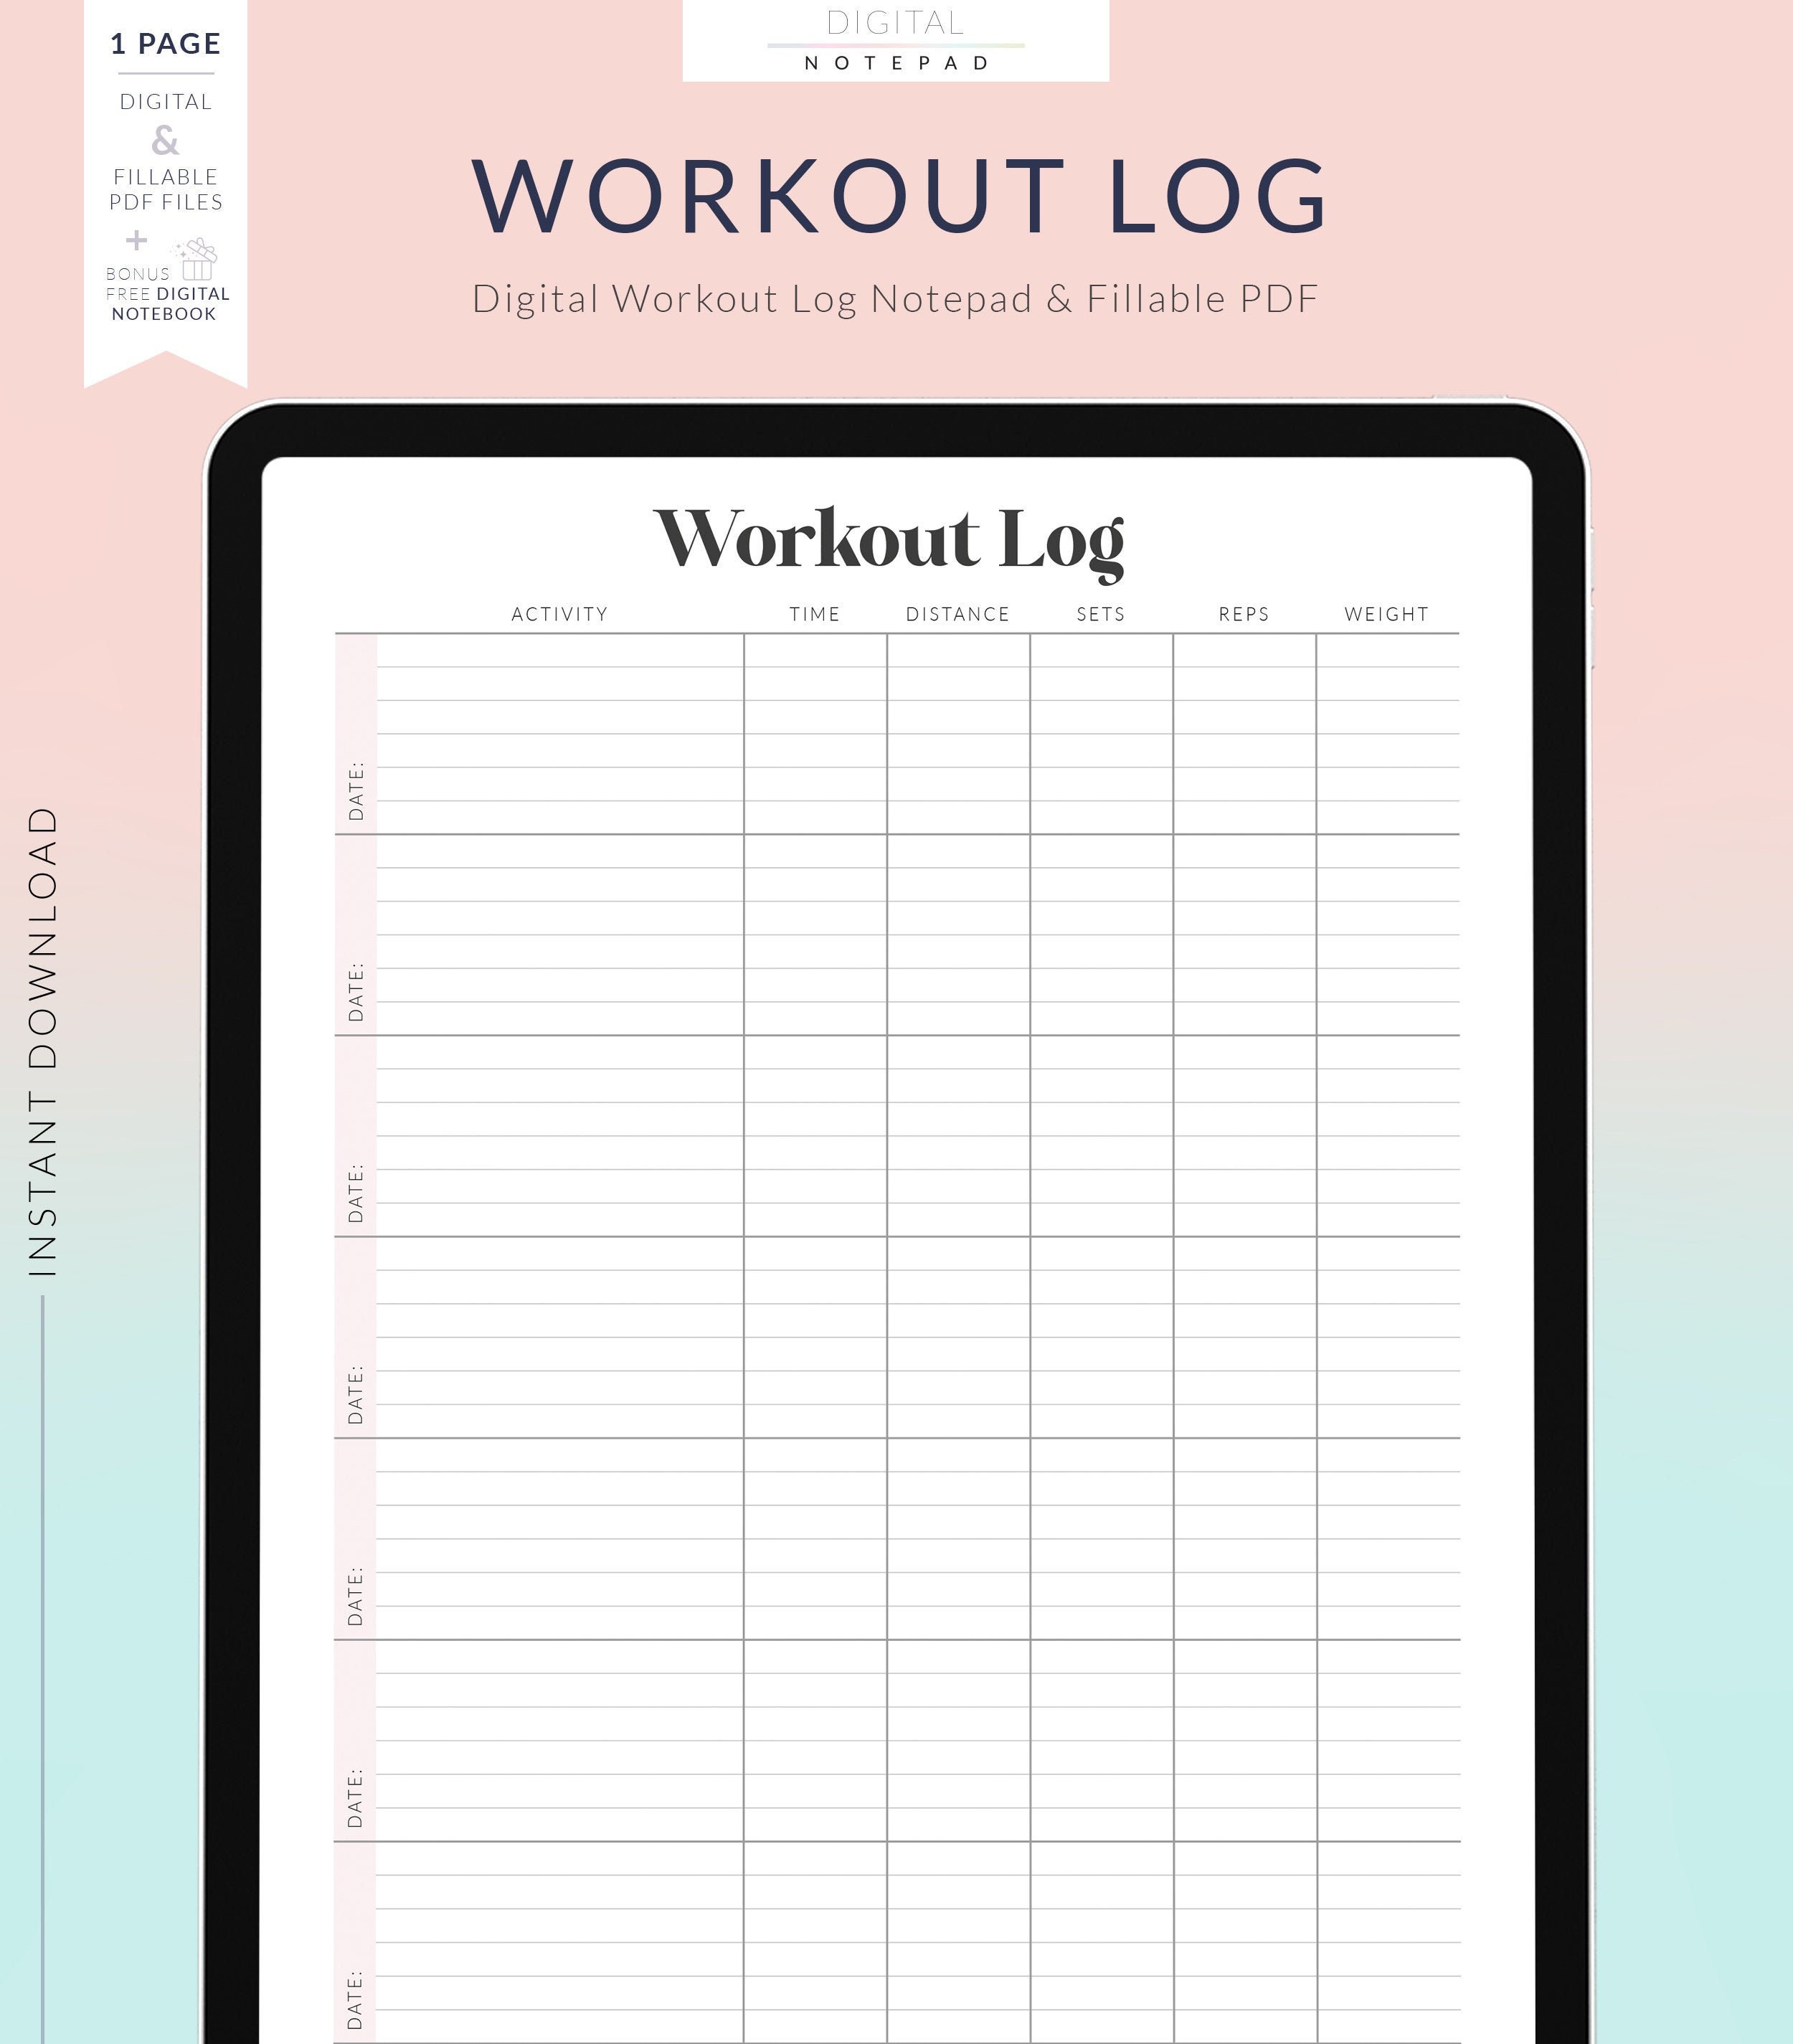 digital-workout-log-for-goodnotes-weekly-workout-template-workout-planner-1-page-notepad